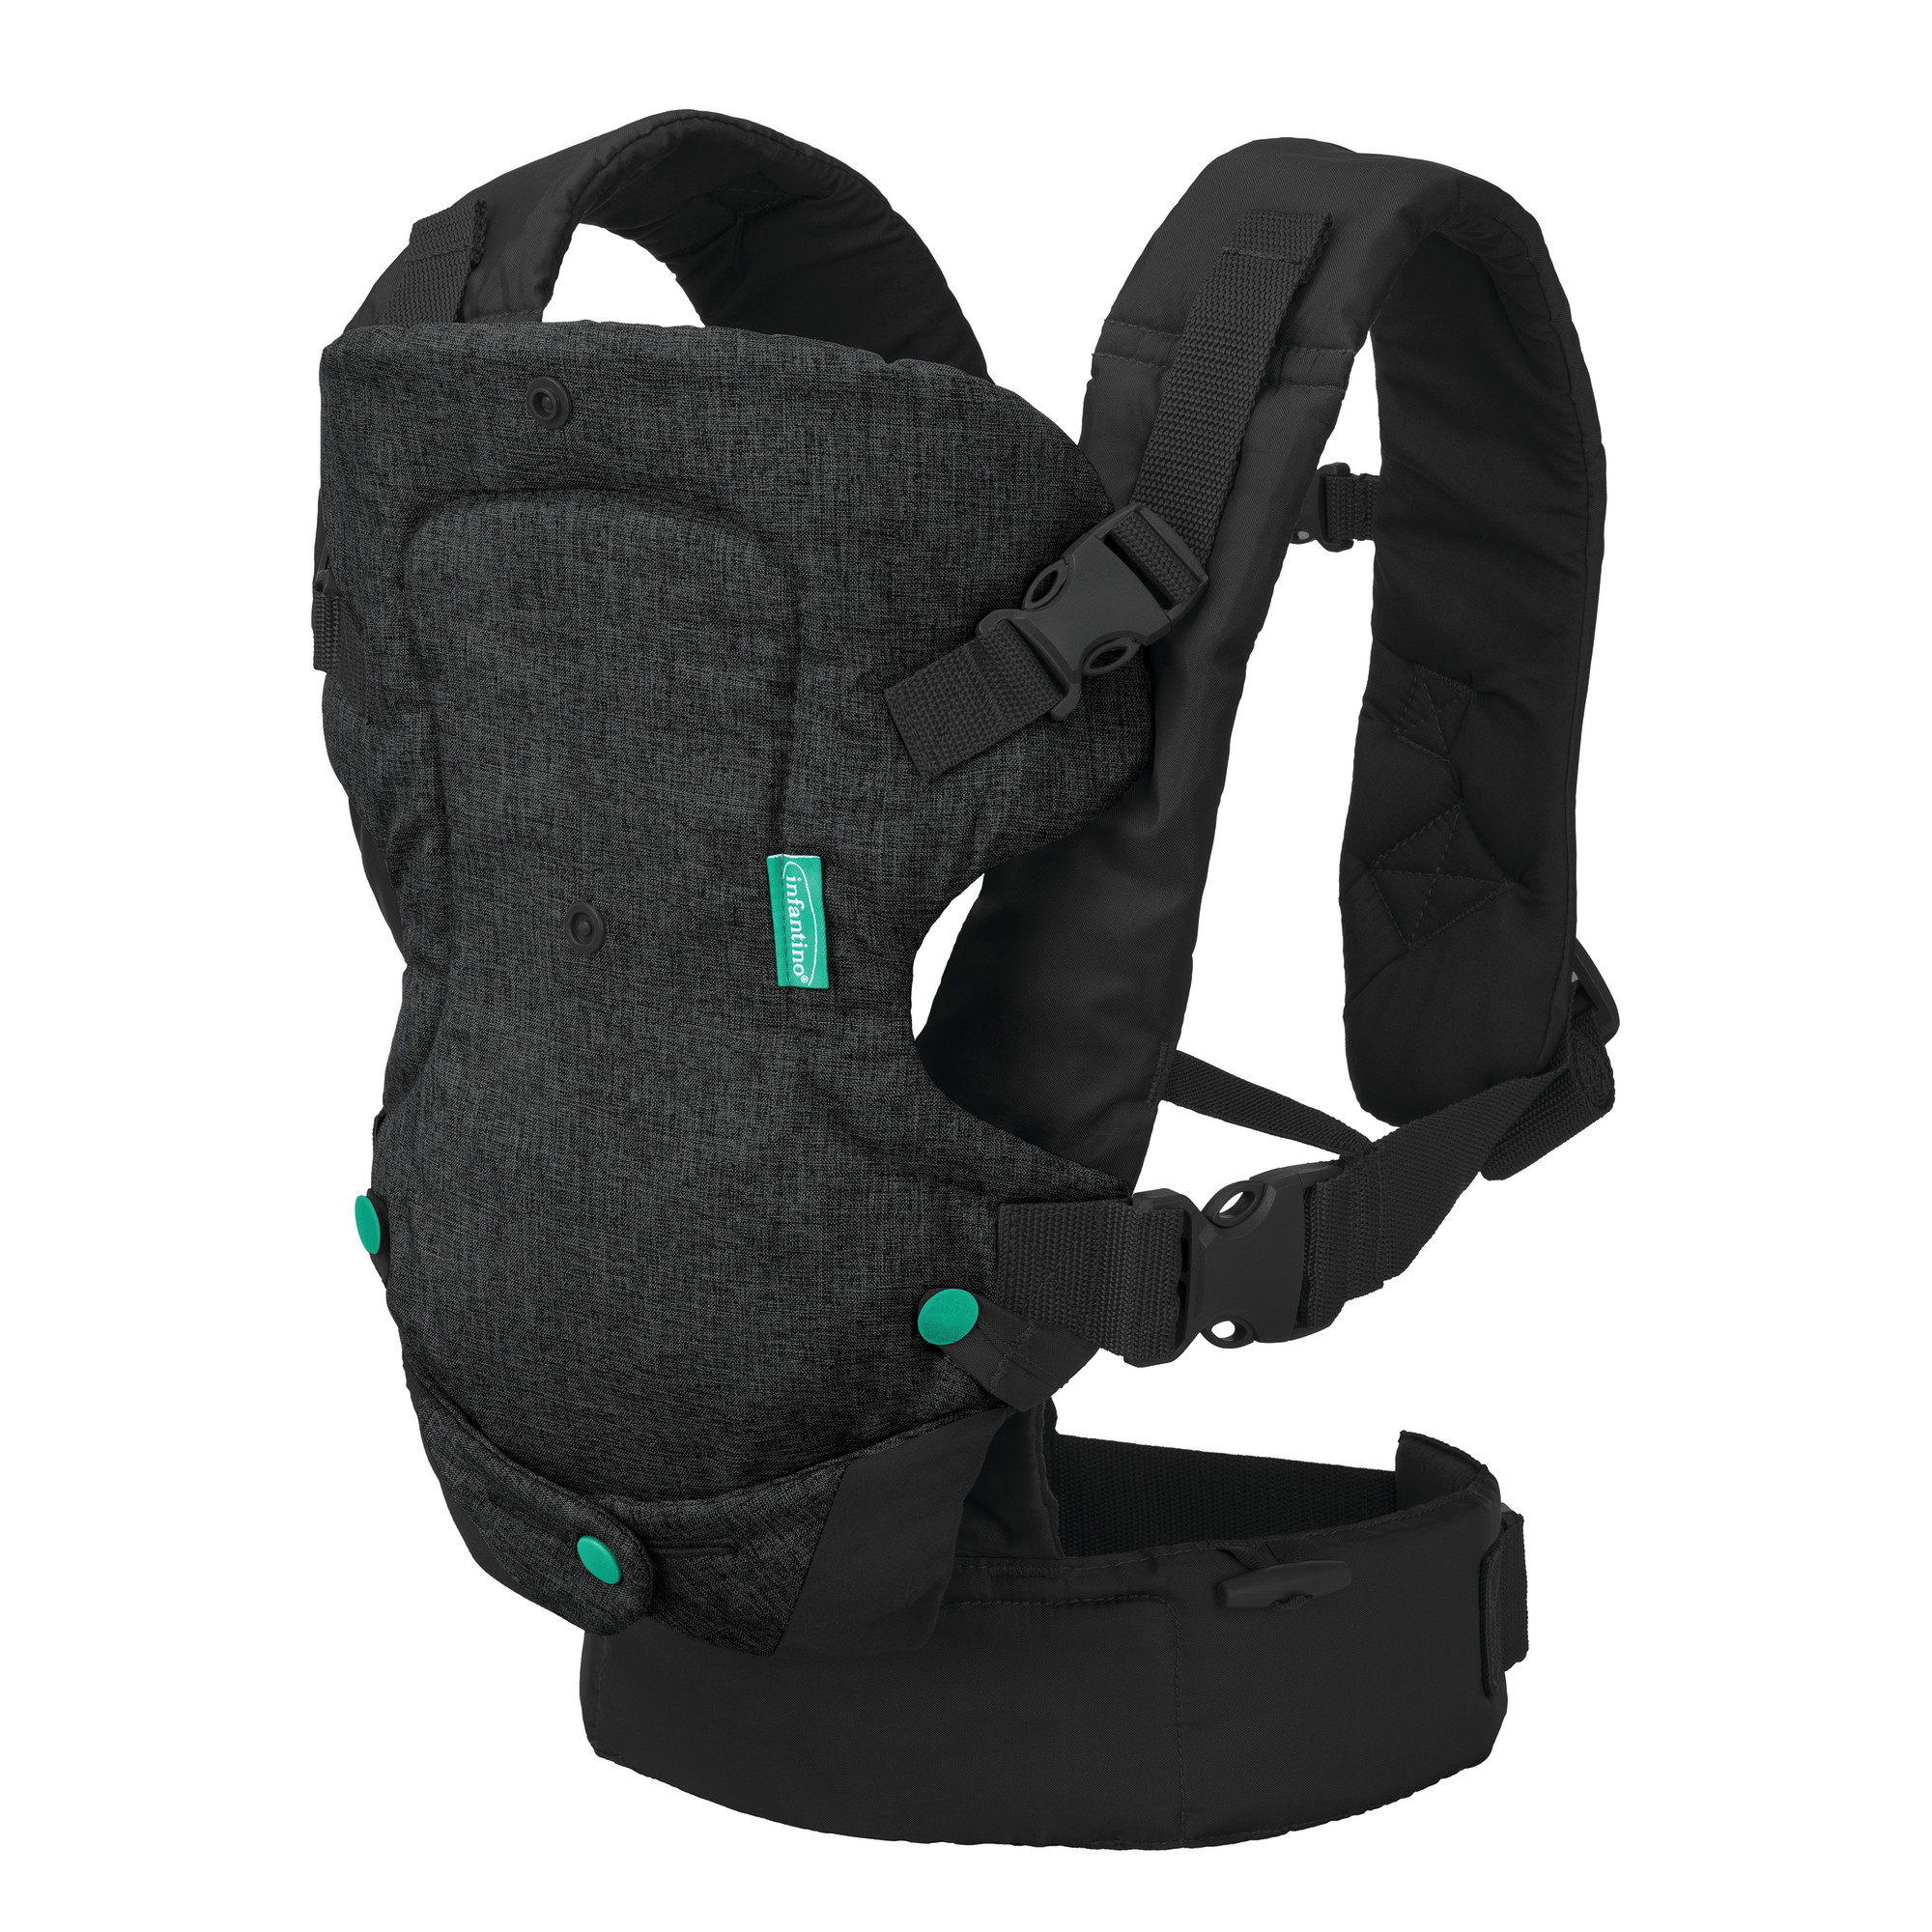 Infantino Flip 4-in-1 Convertible Baby Carrier, 4-Position, 8-32lb, Black - image 1 of 12